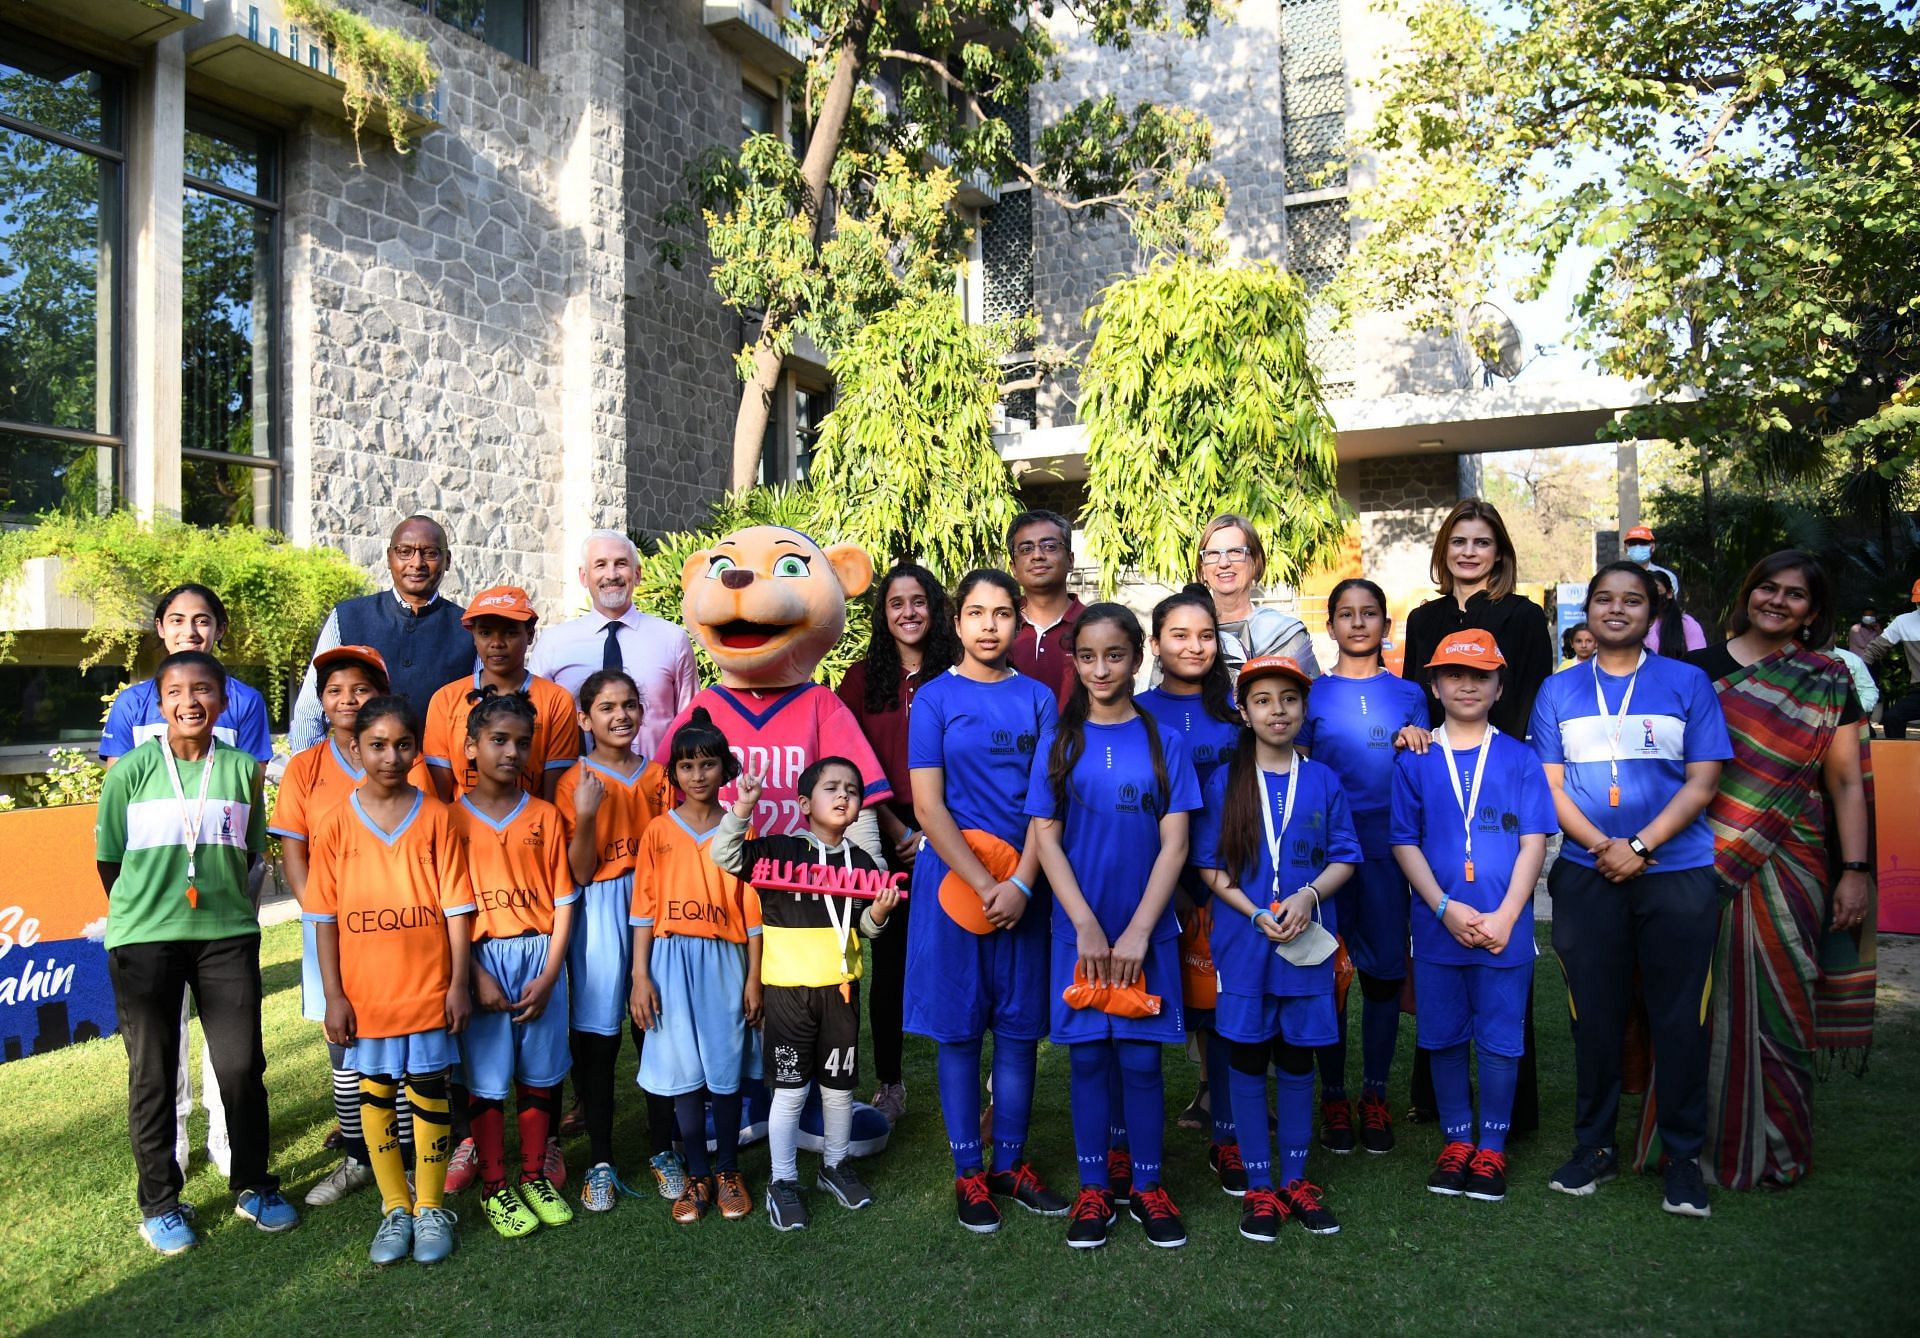 Meet Ibha, Official Mascot for the FIFA U-17 Women's World Cup